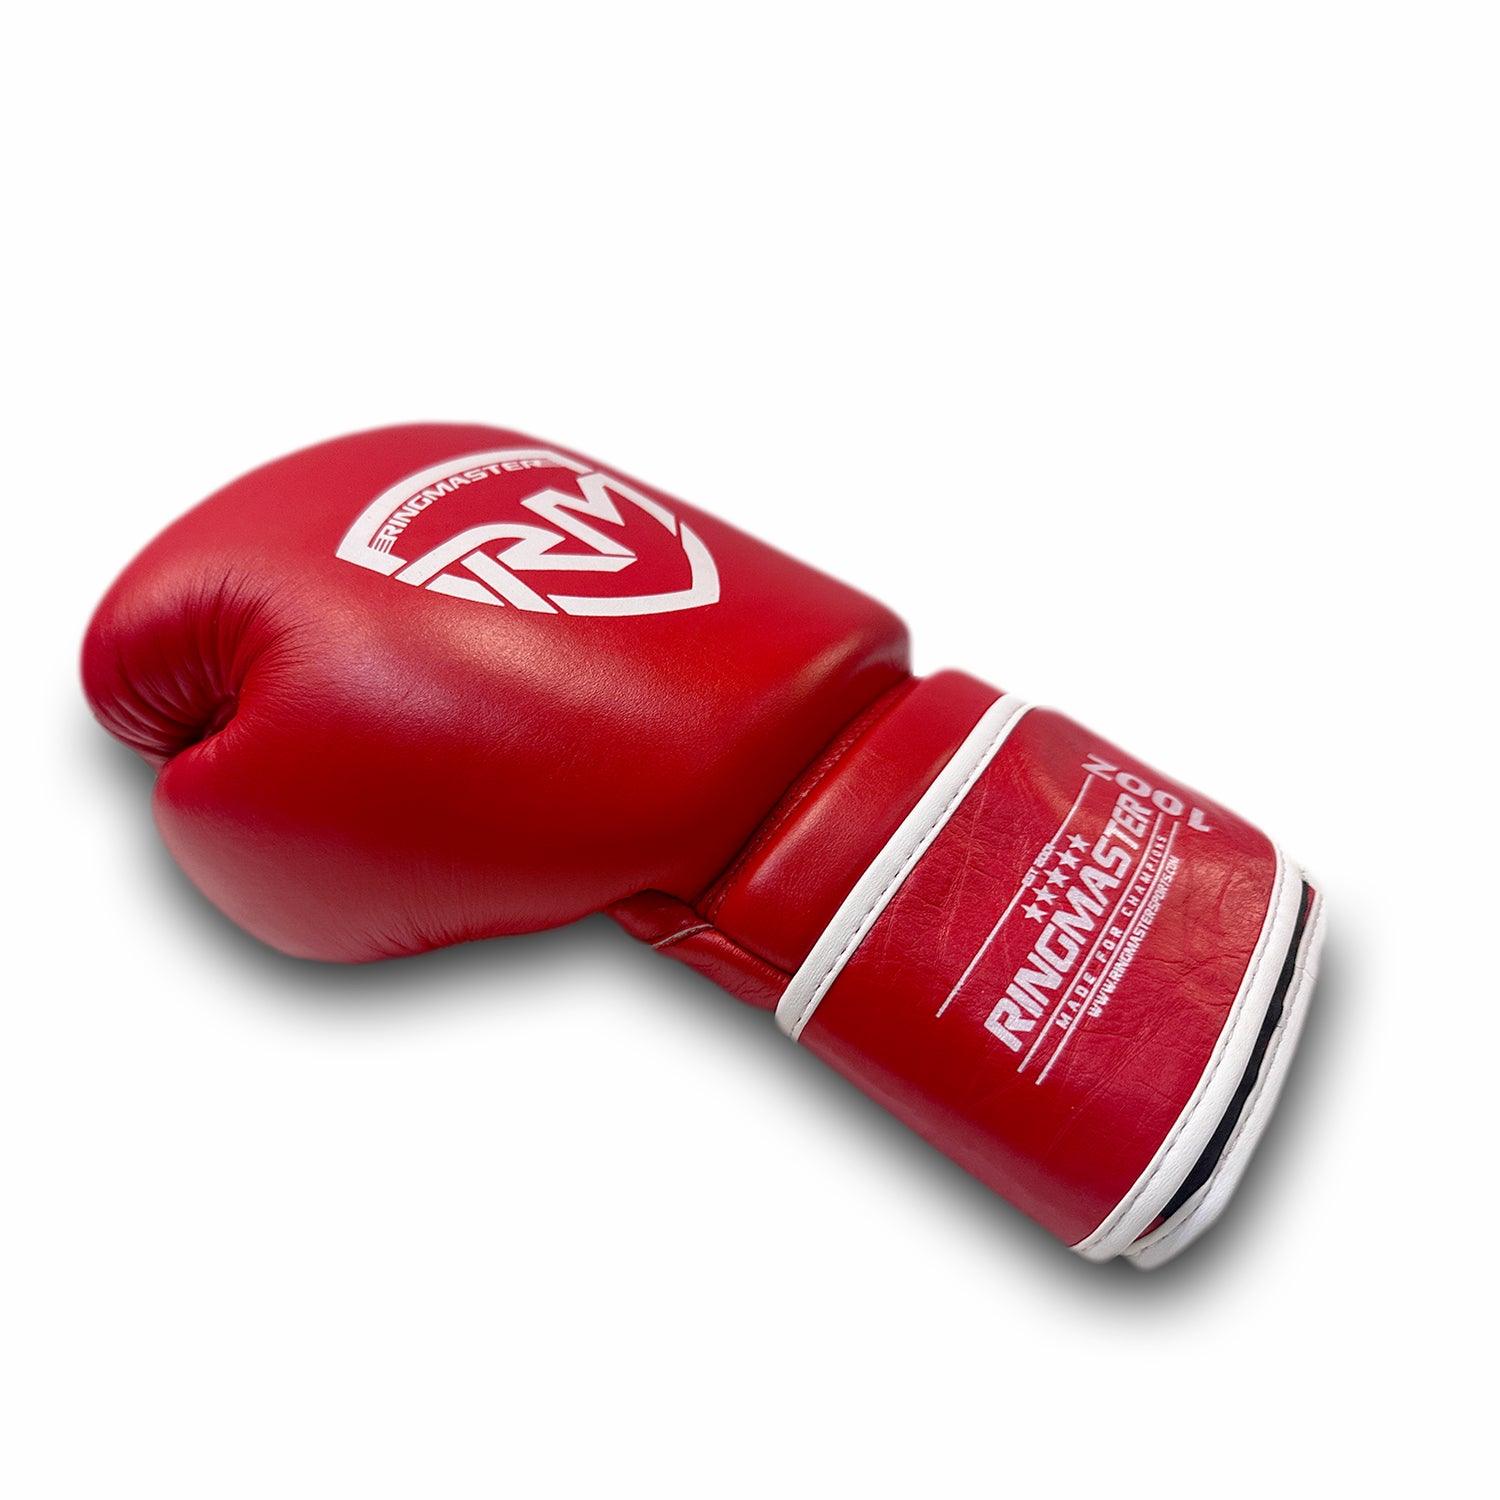 RingMaster Sports Boxing Gloves Champion Series IBA Styled Genuine Leather Red - RINGMASTER SPORTS - Made For Champions